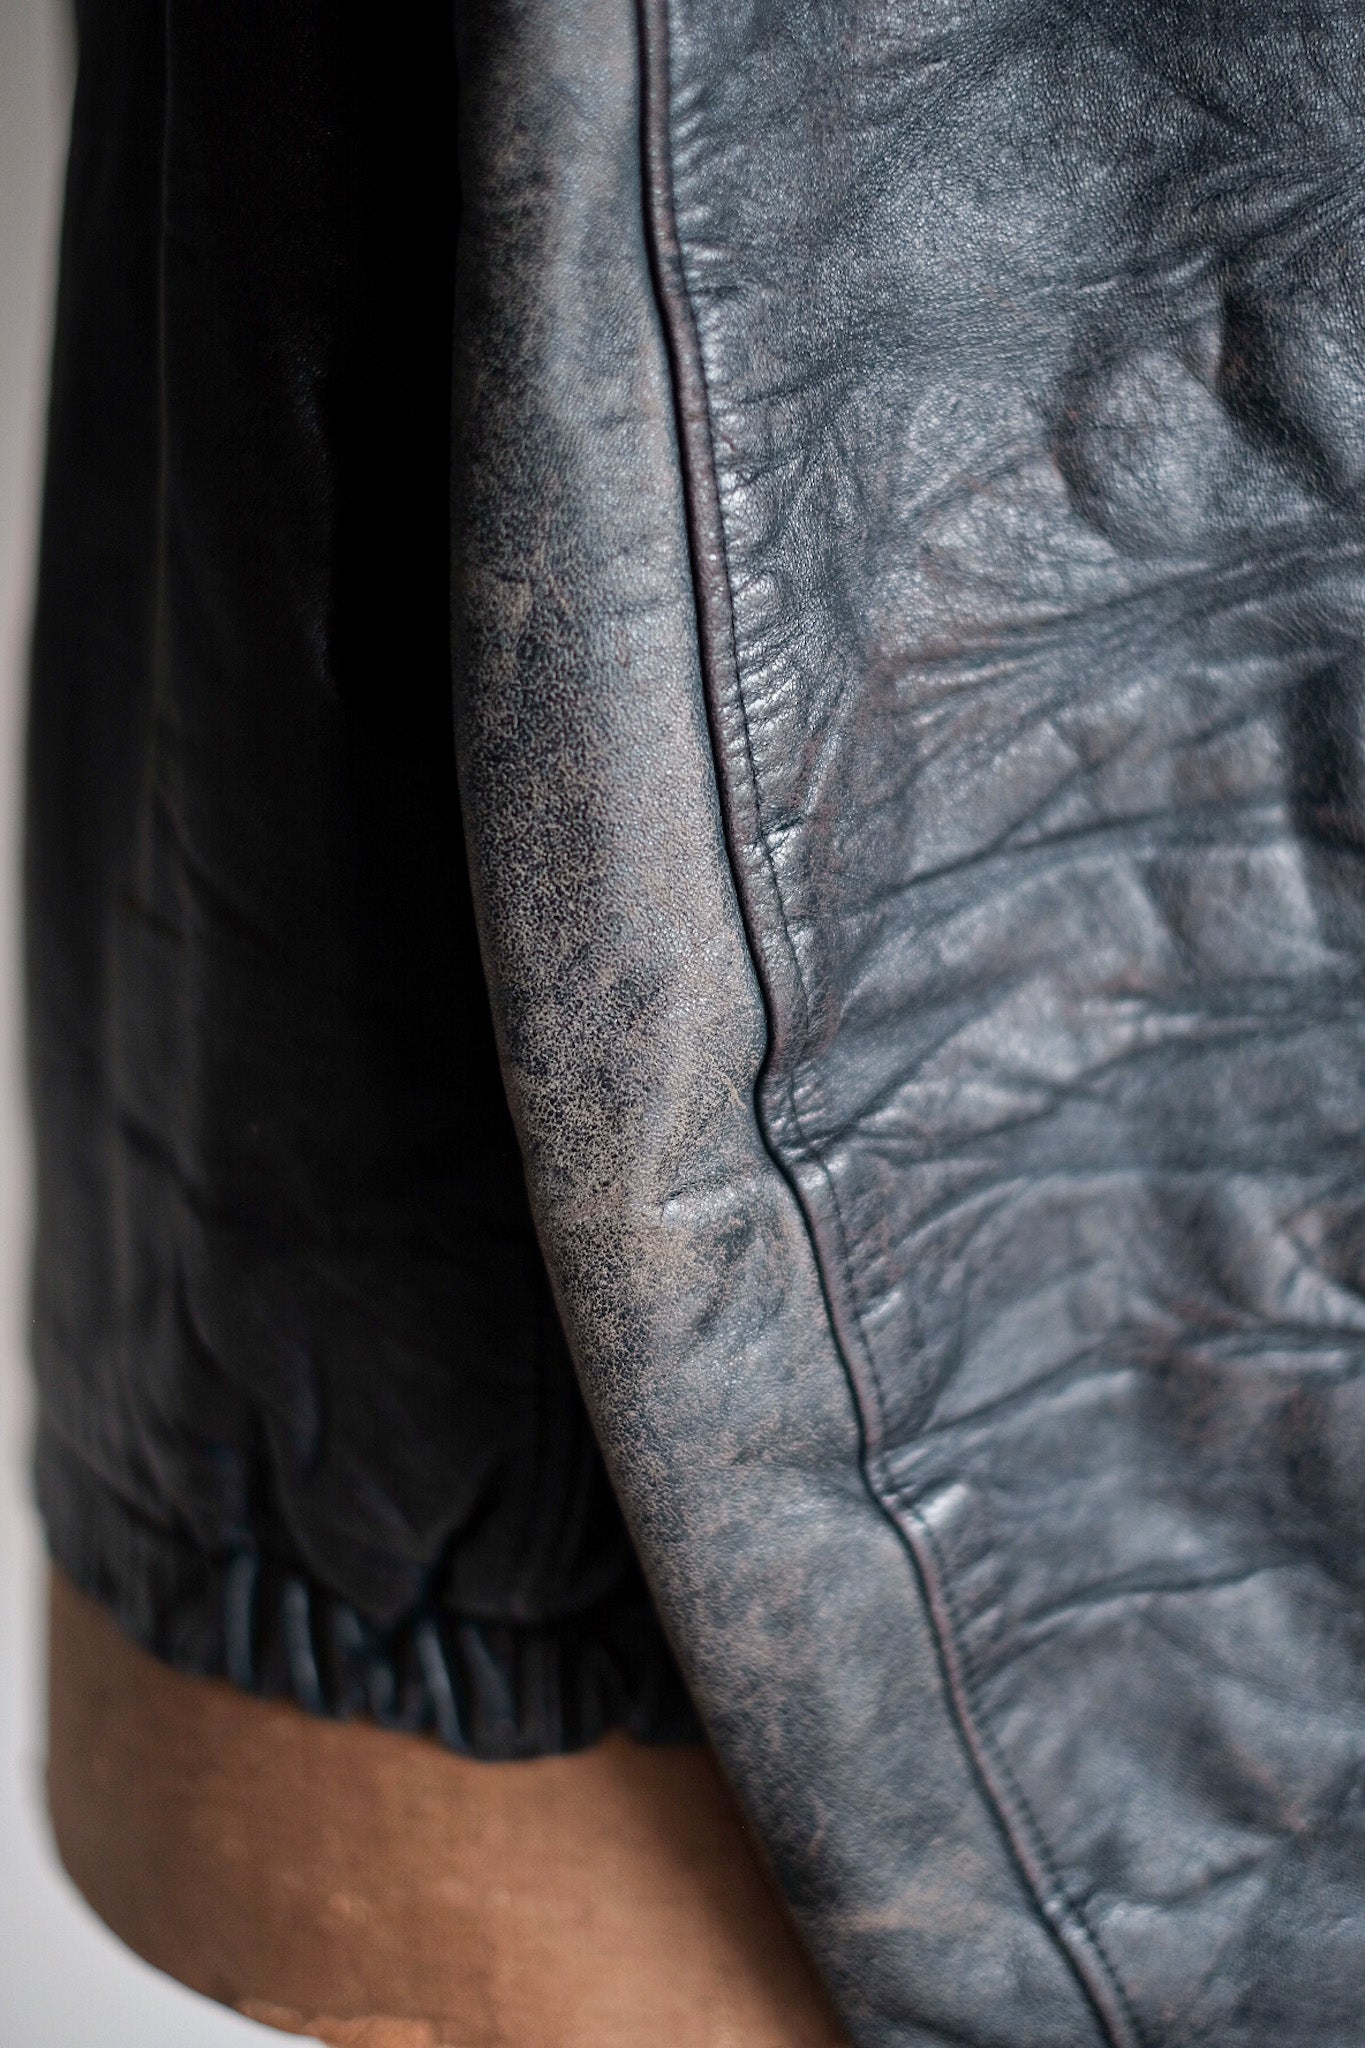 【~80's】French Air Force Pilot Leather Jacket